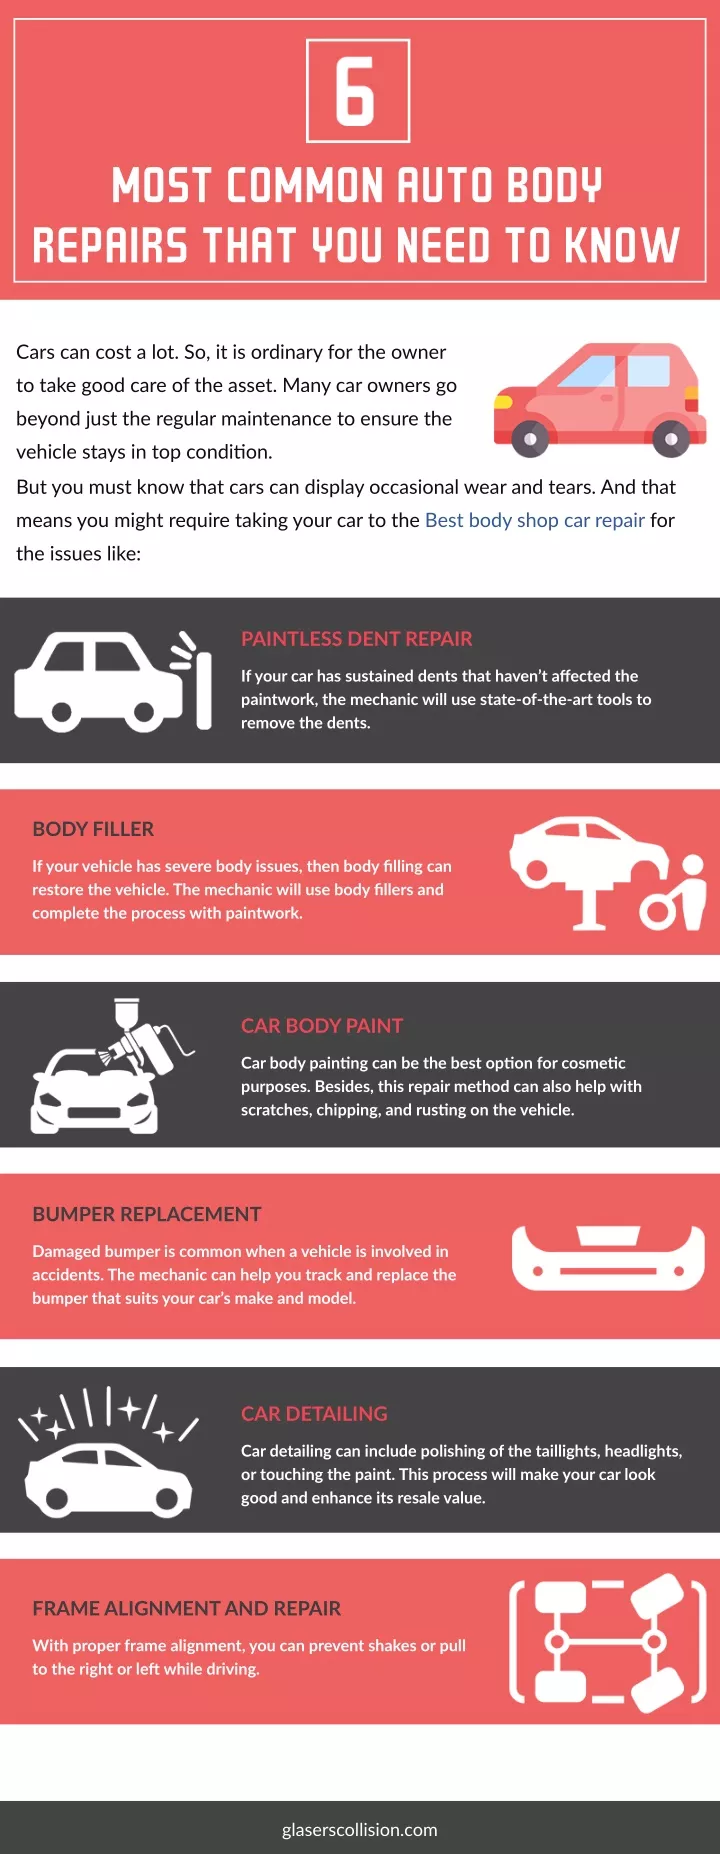 most common auto body repairs that you need